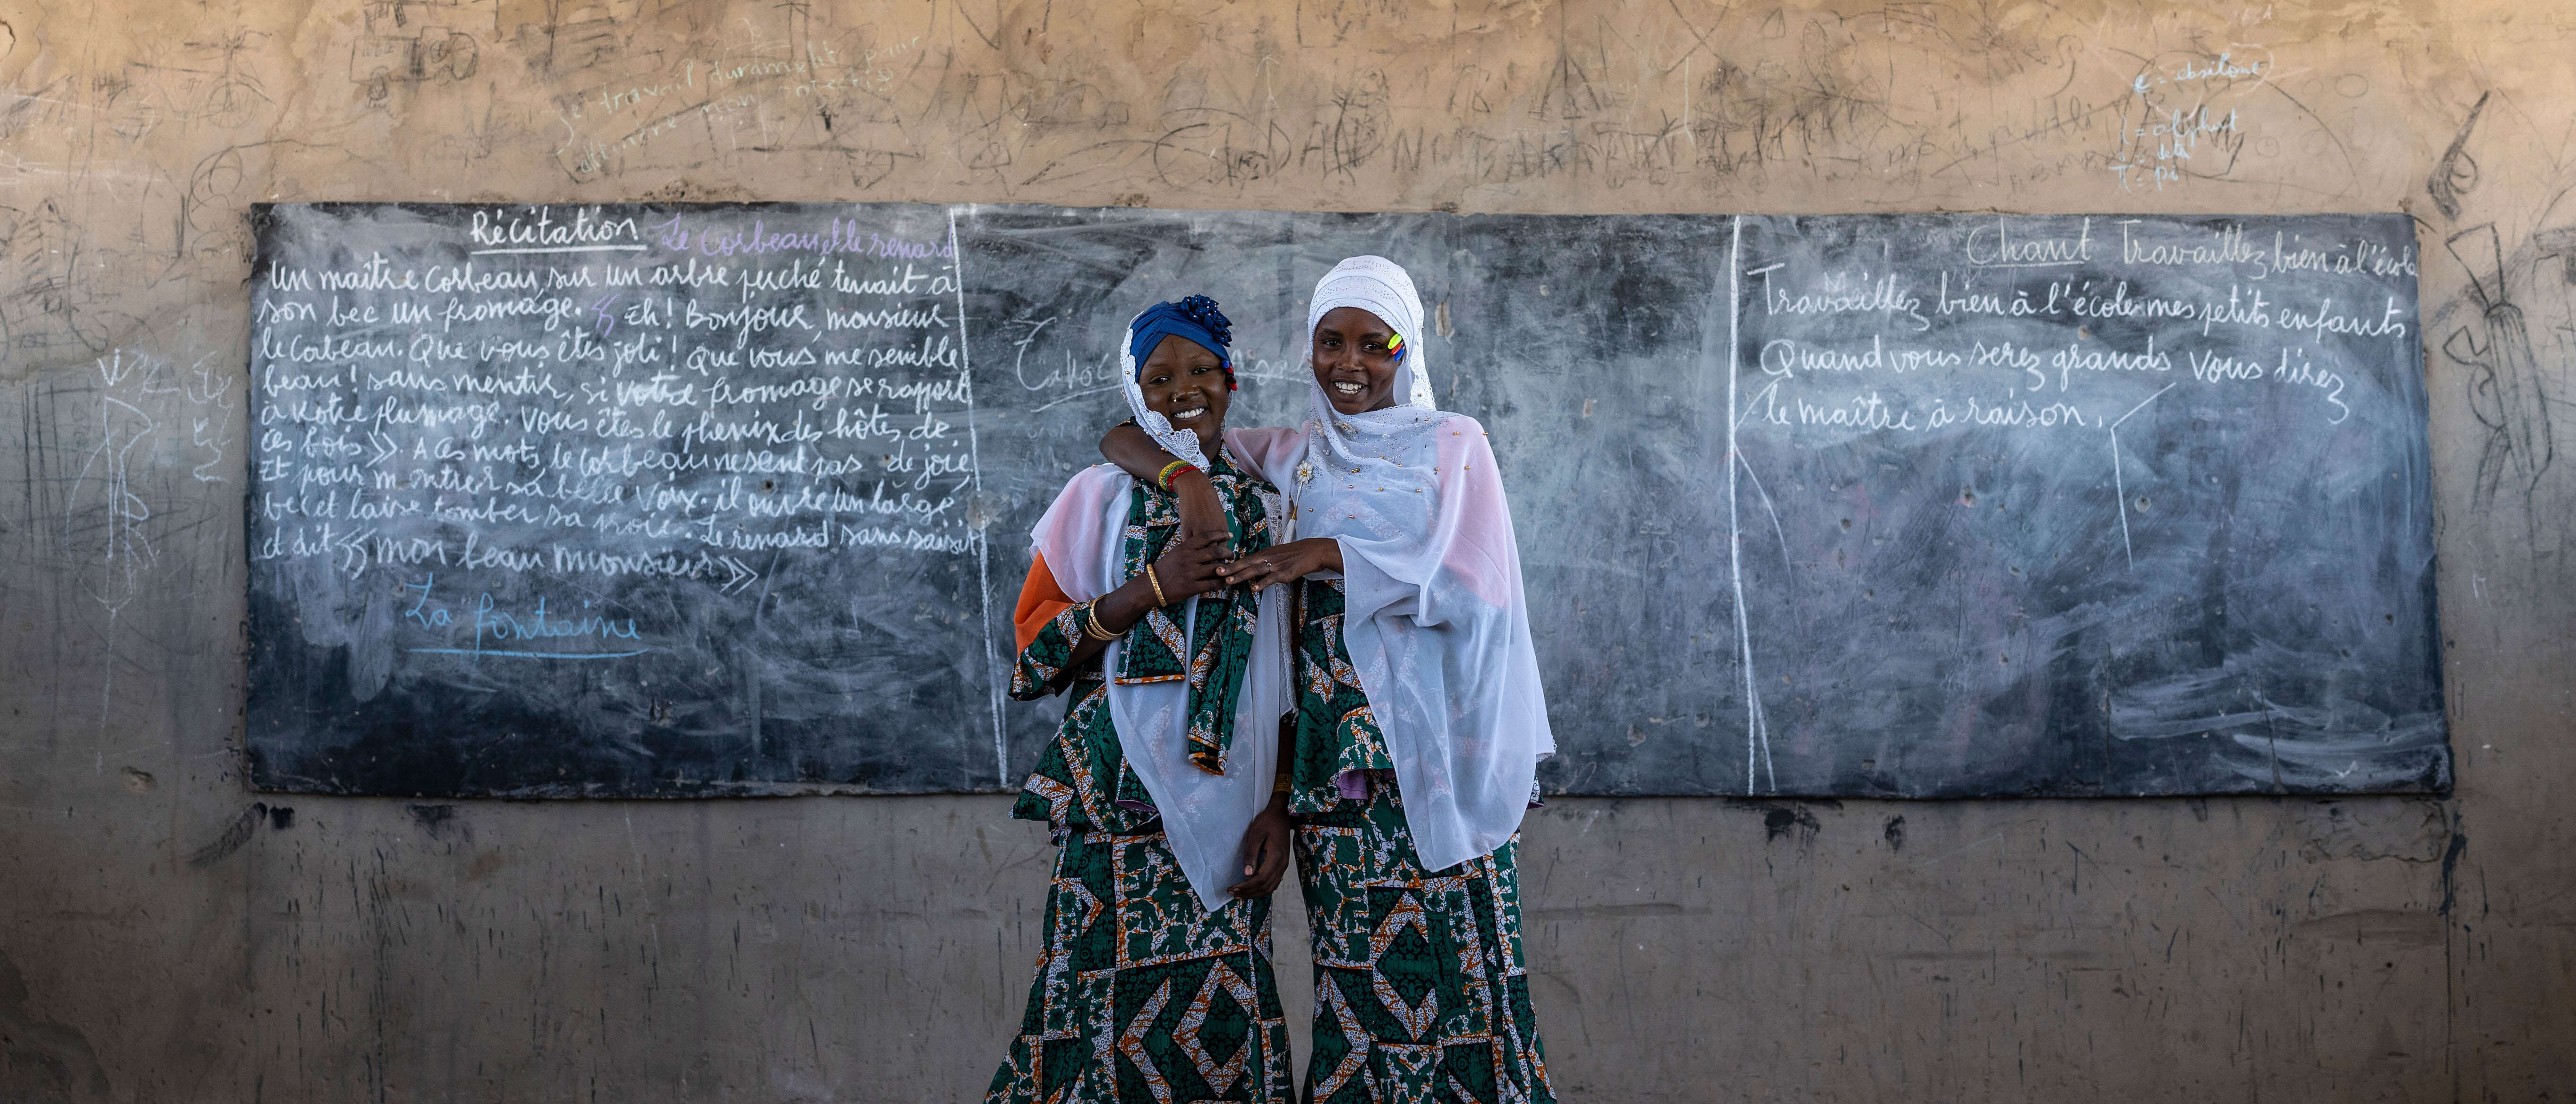 Two women embrace each other and share a smile while posing in a school in Chad.